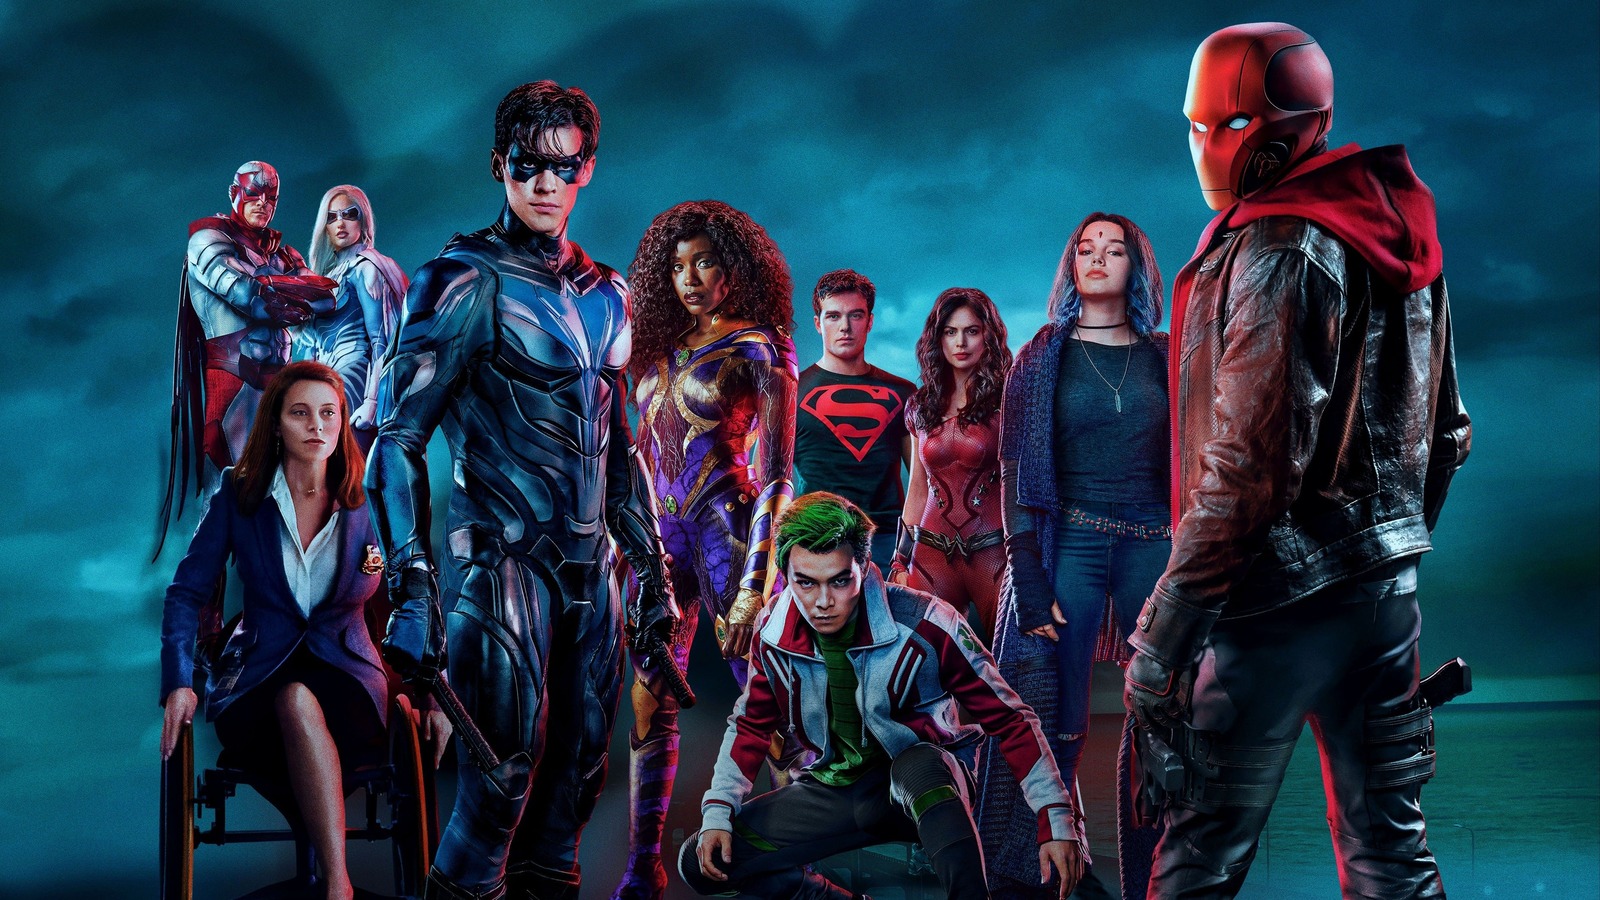 Titans Season Release Date Cast And More For The Returning DC Comics Show